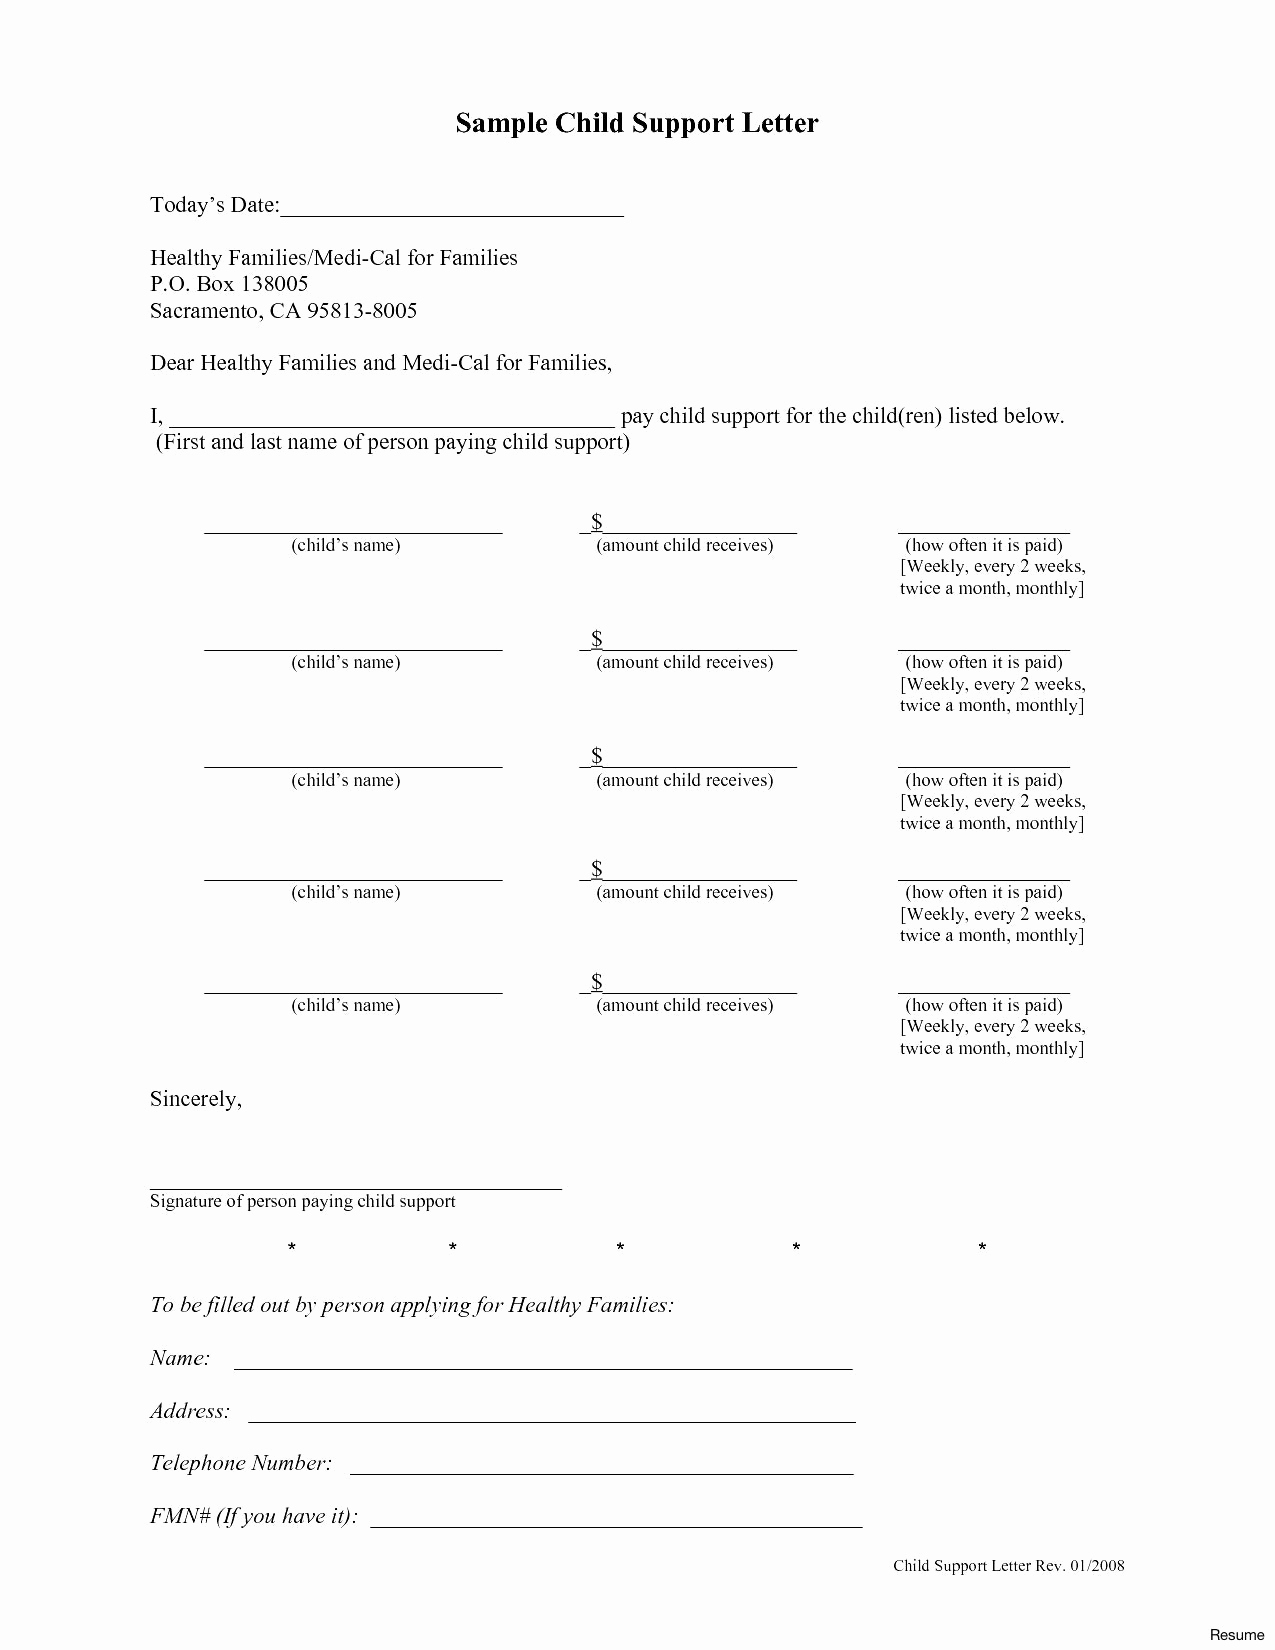 proof of child support letter template example-Child Support Letters Sample Lovely Sample Child Support Letter Letter Support Template Gplusnick for 5-s